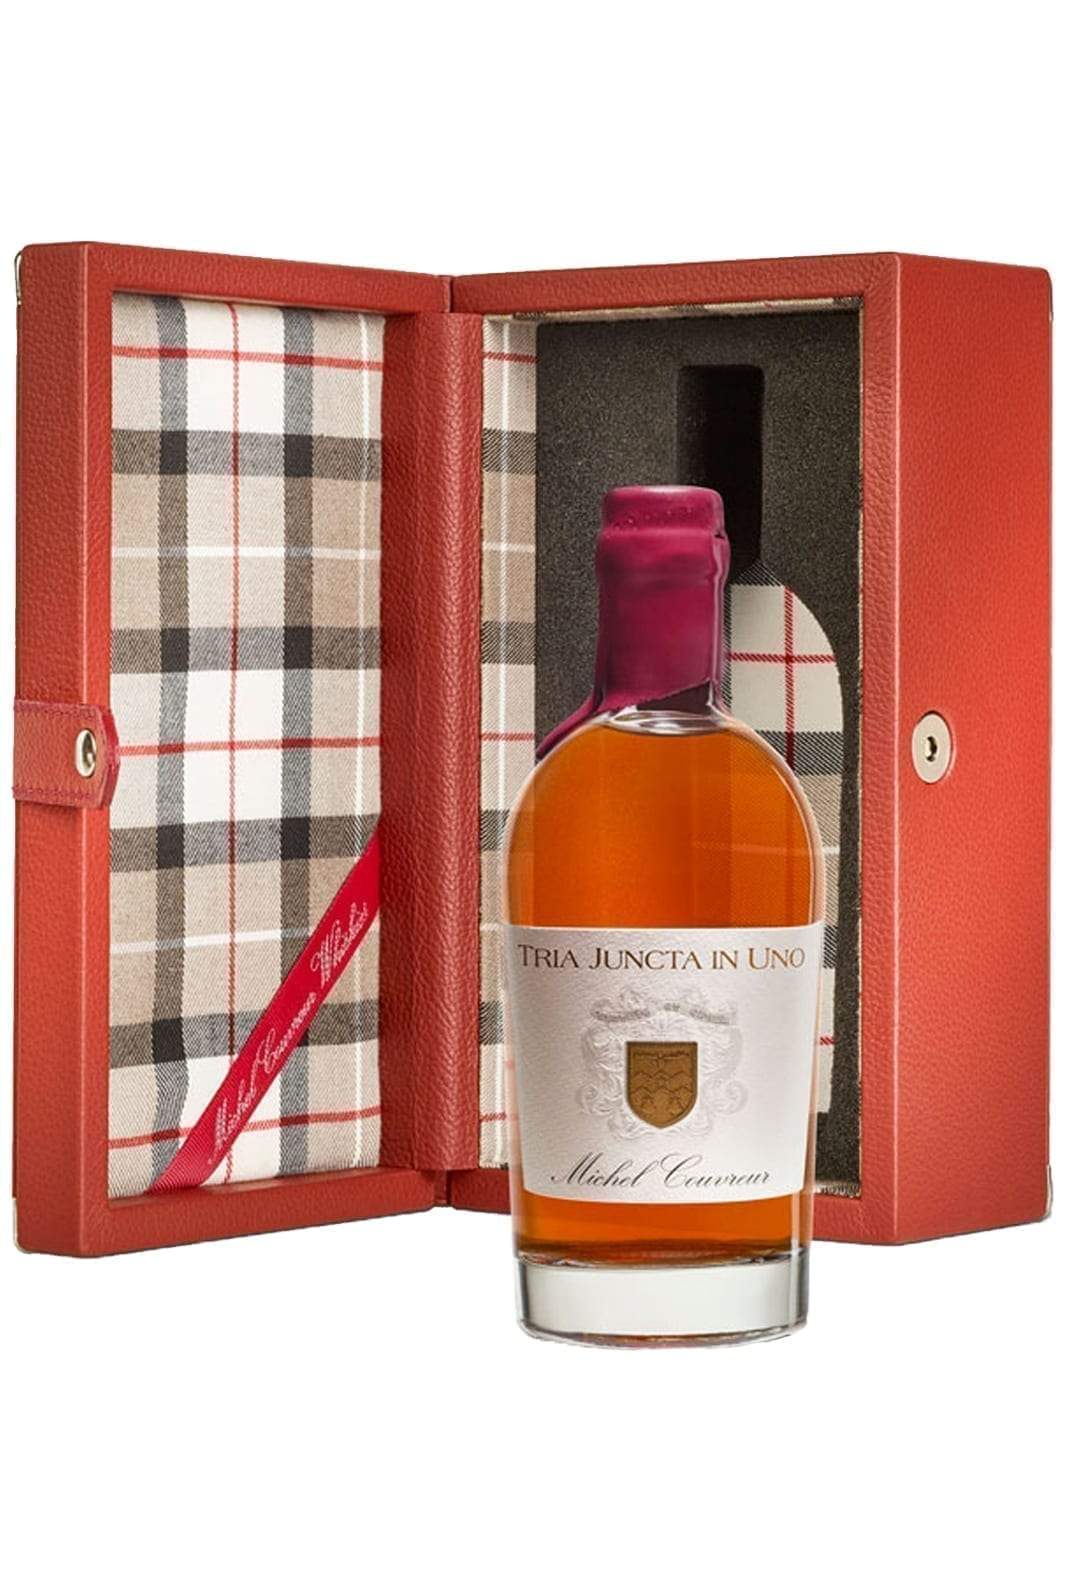 Michel Couvreur Whisky Tria Juncta in Uno 1989 to 2019 45% 500ml | Whiskey | Shop online at Spirits of France